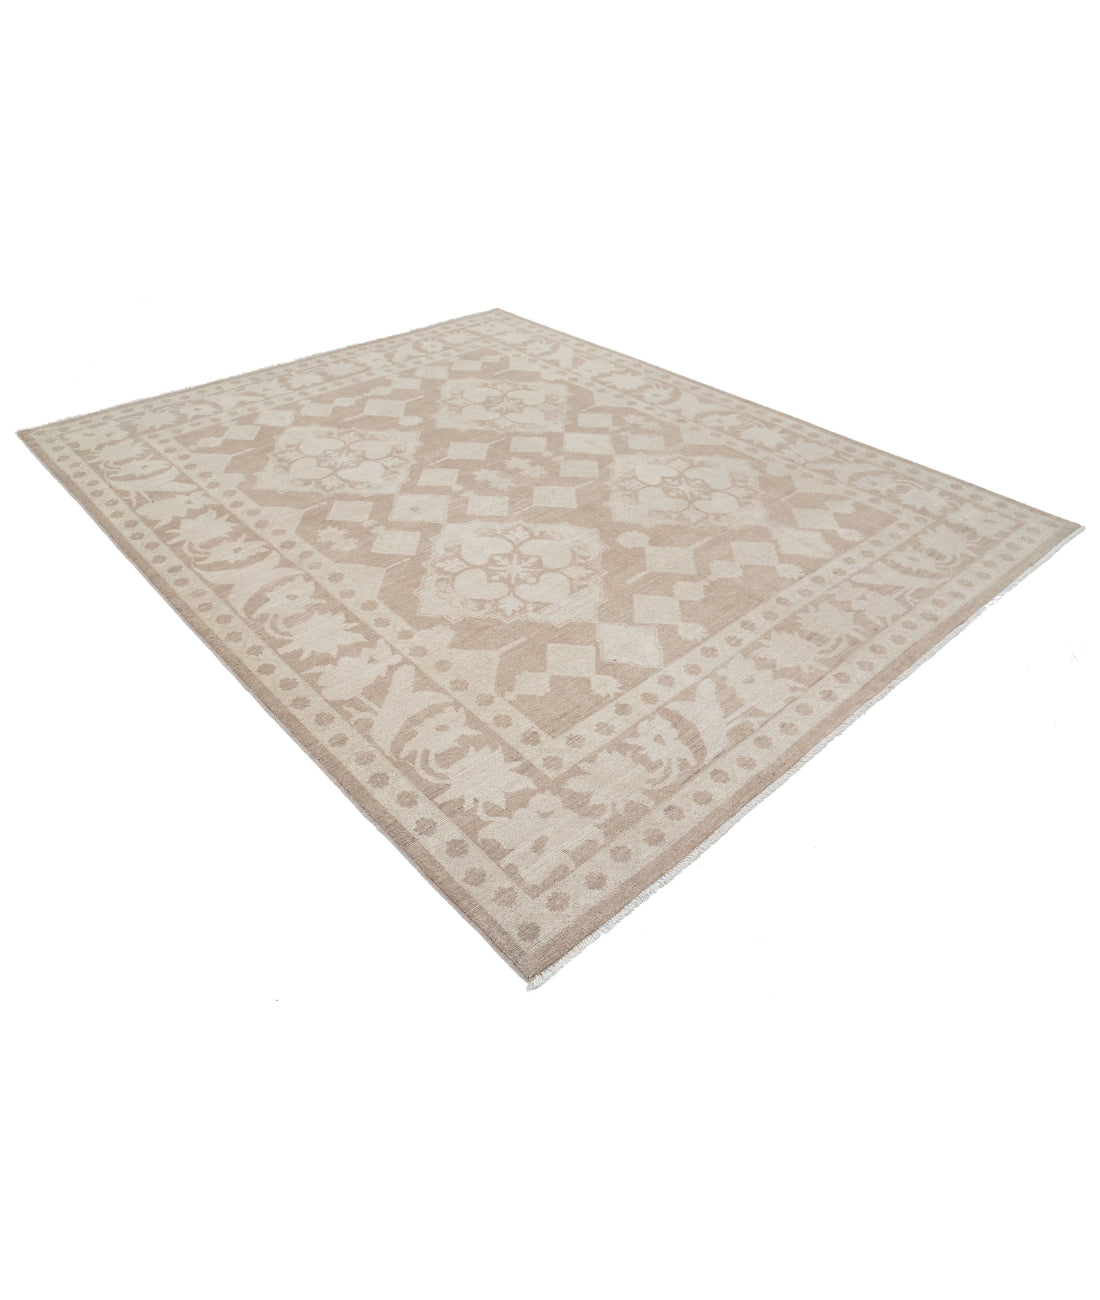 Hand Knotted Serenity Wool Rug - 7'10'' x 9'9'' 7'10'' x 9'9'' (235 X 293) / Taupe / Ivory